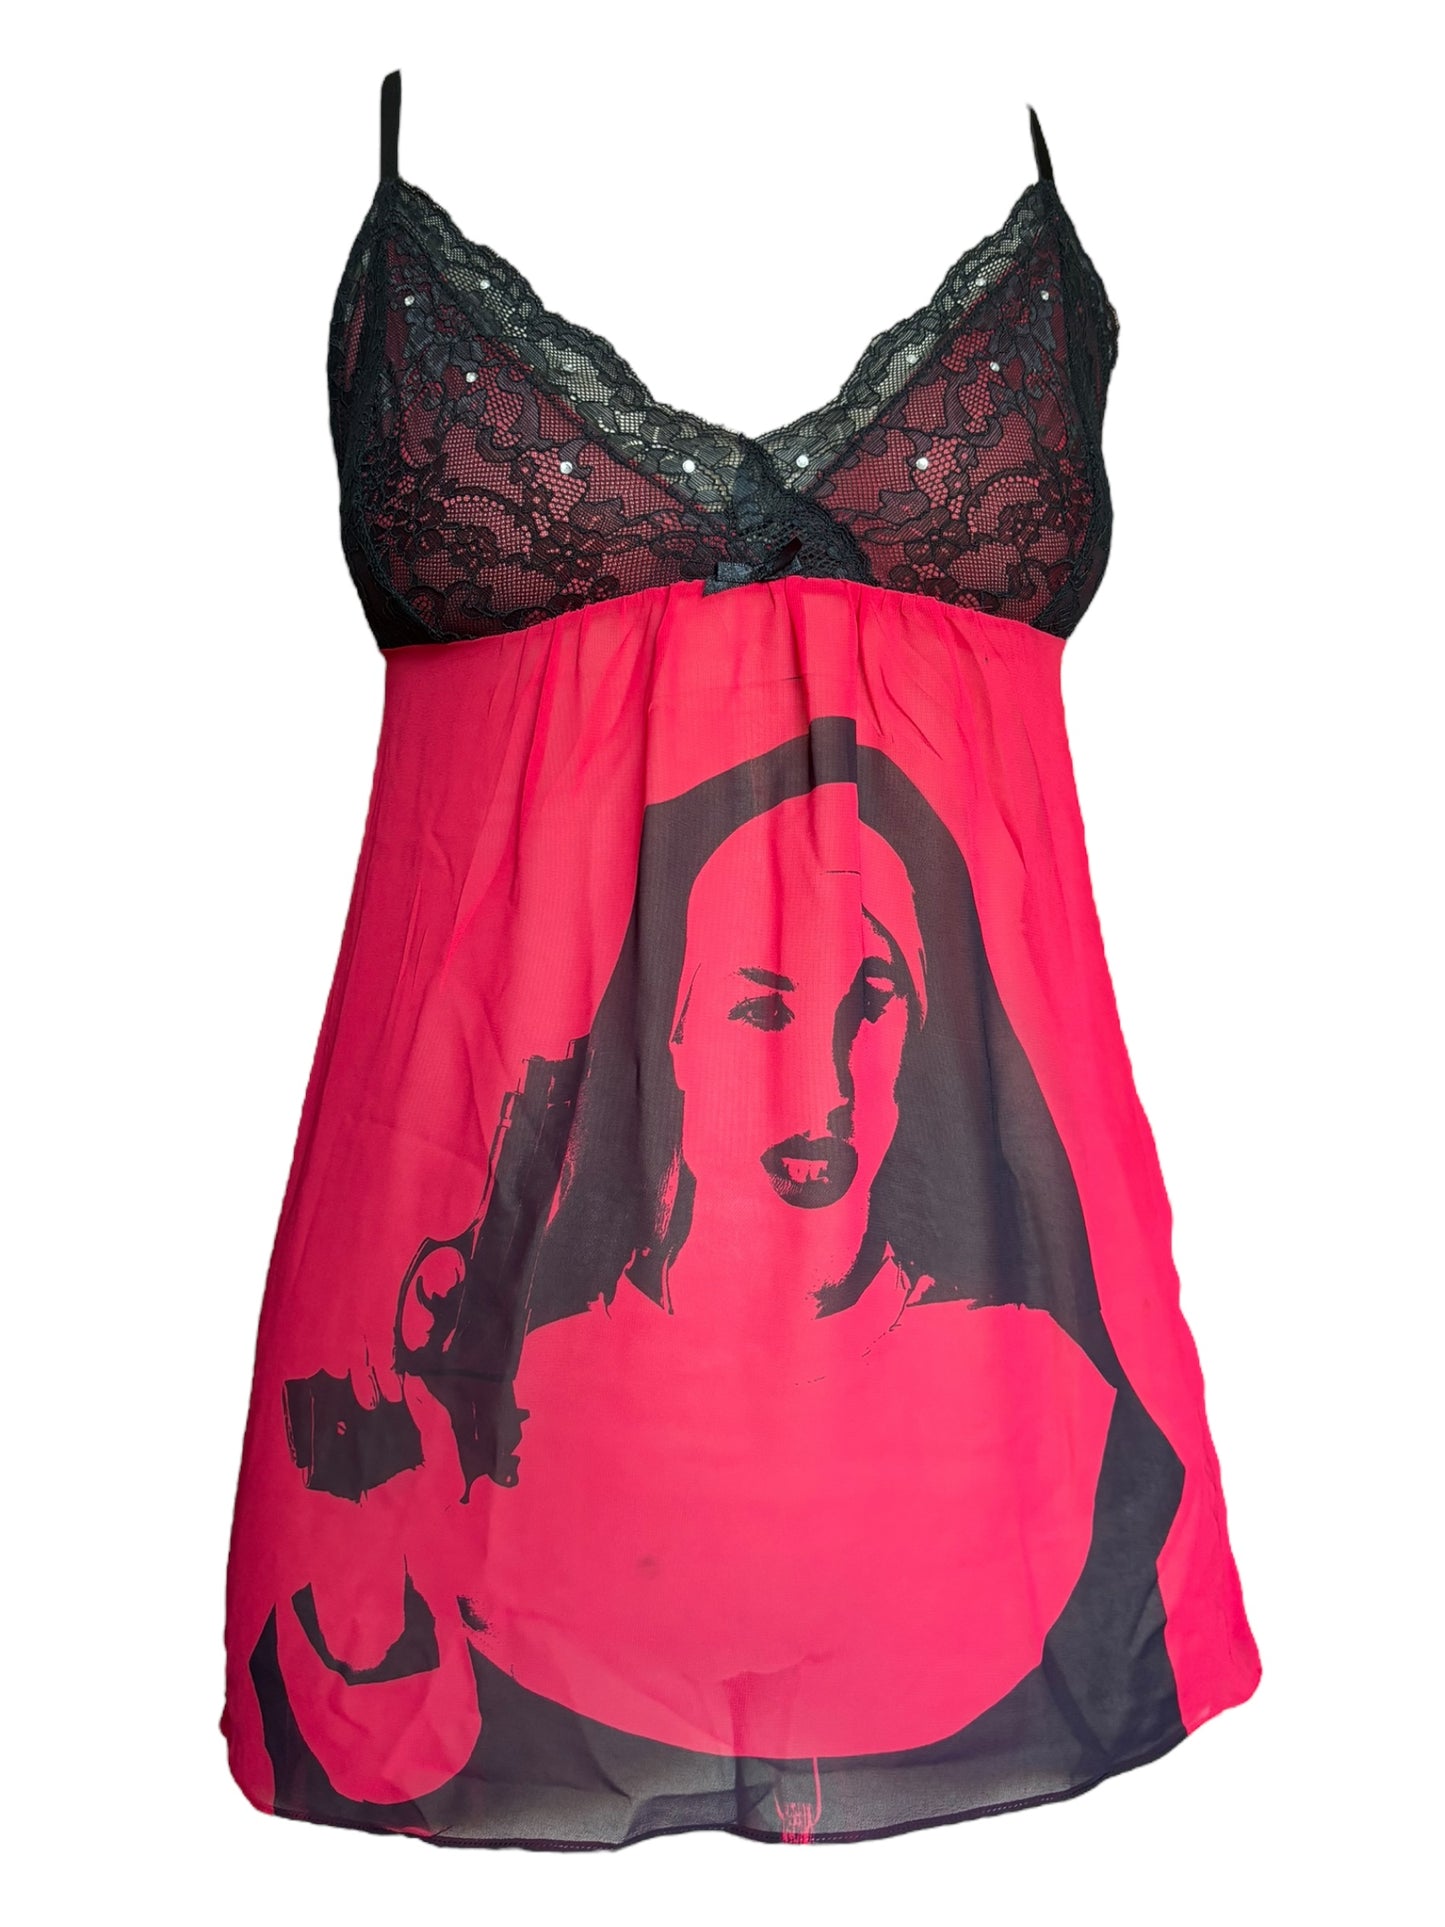 Nun of your business Red Babydoll Tank -S